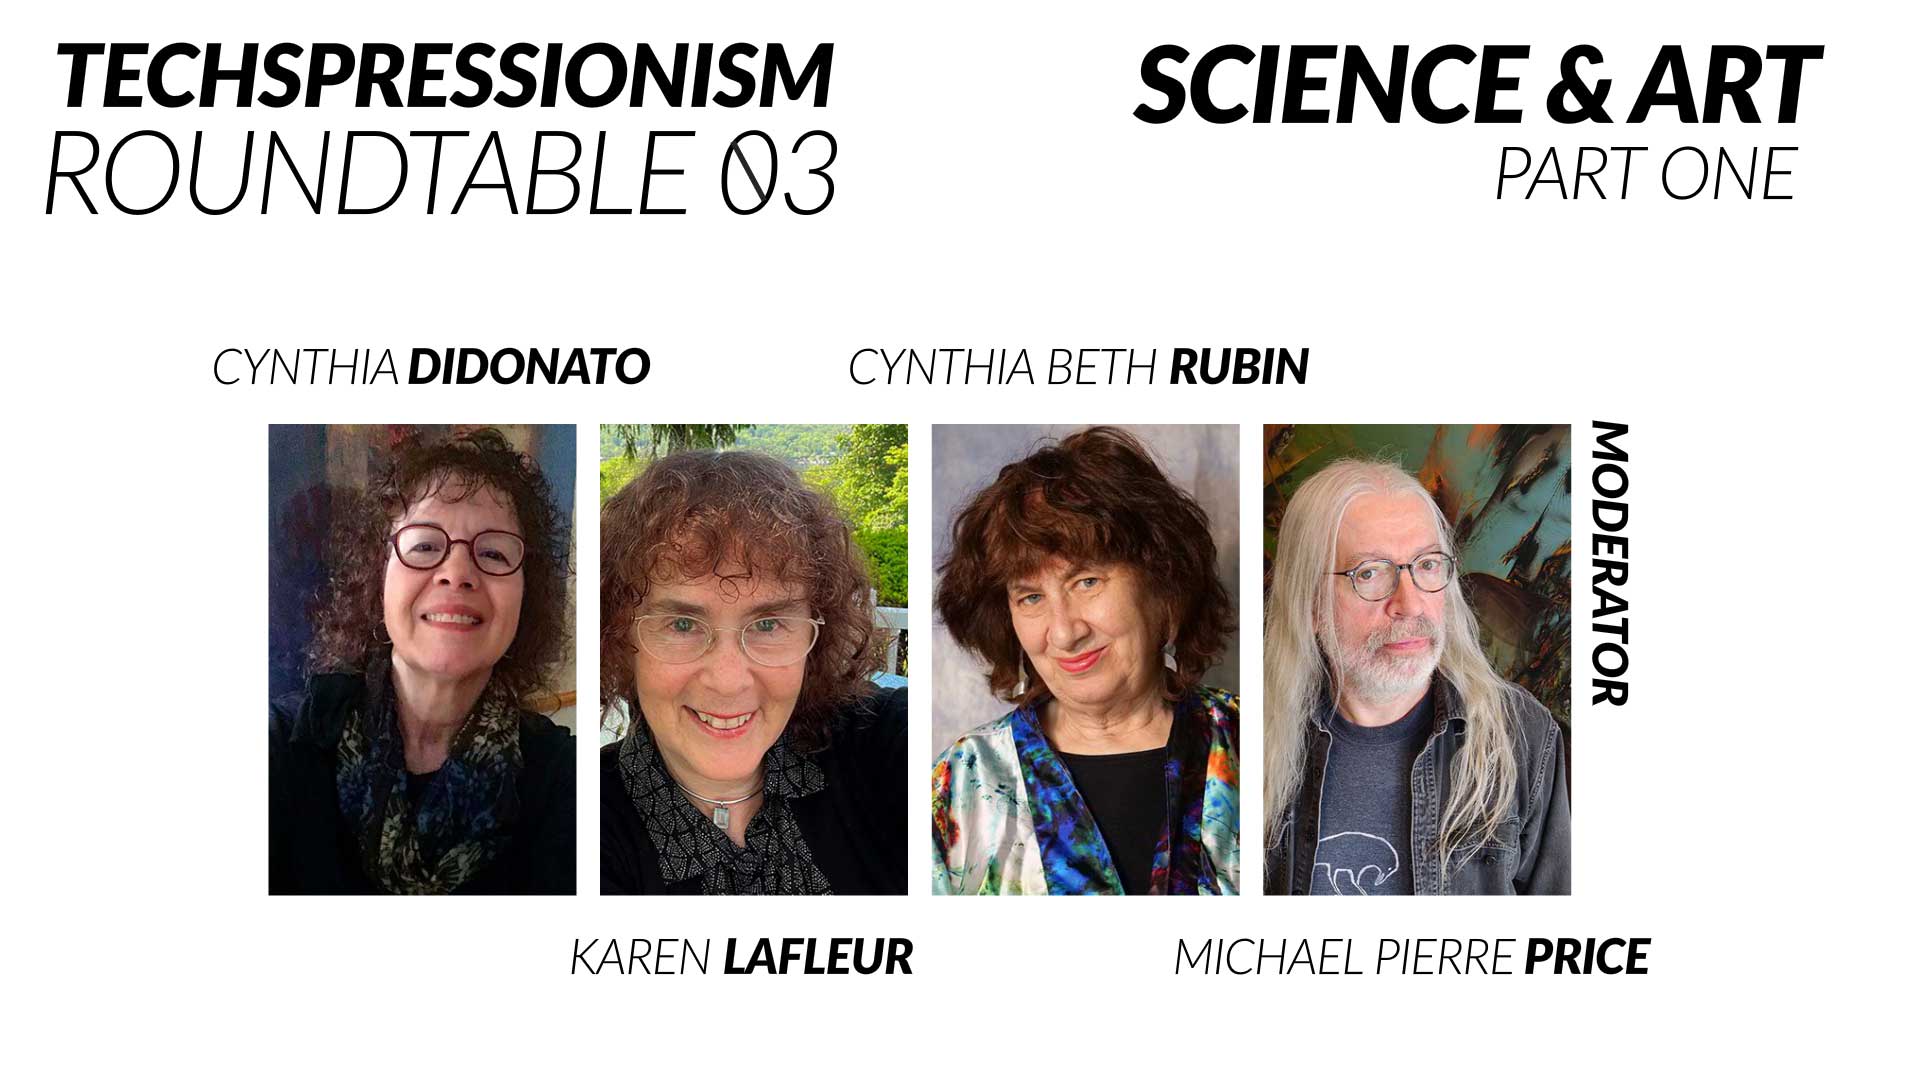 Techspressionism Roundtable 03 // Science & Art: Part One